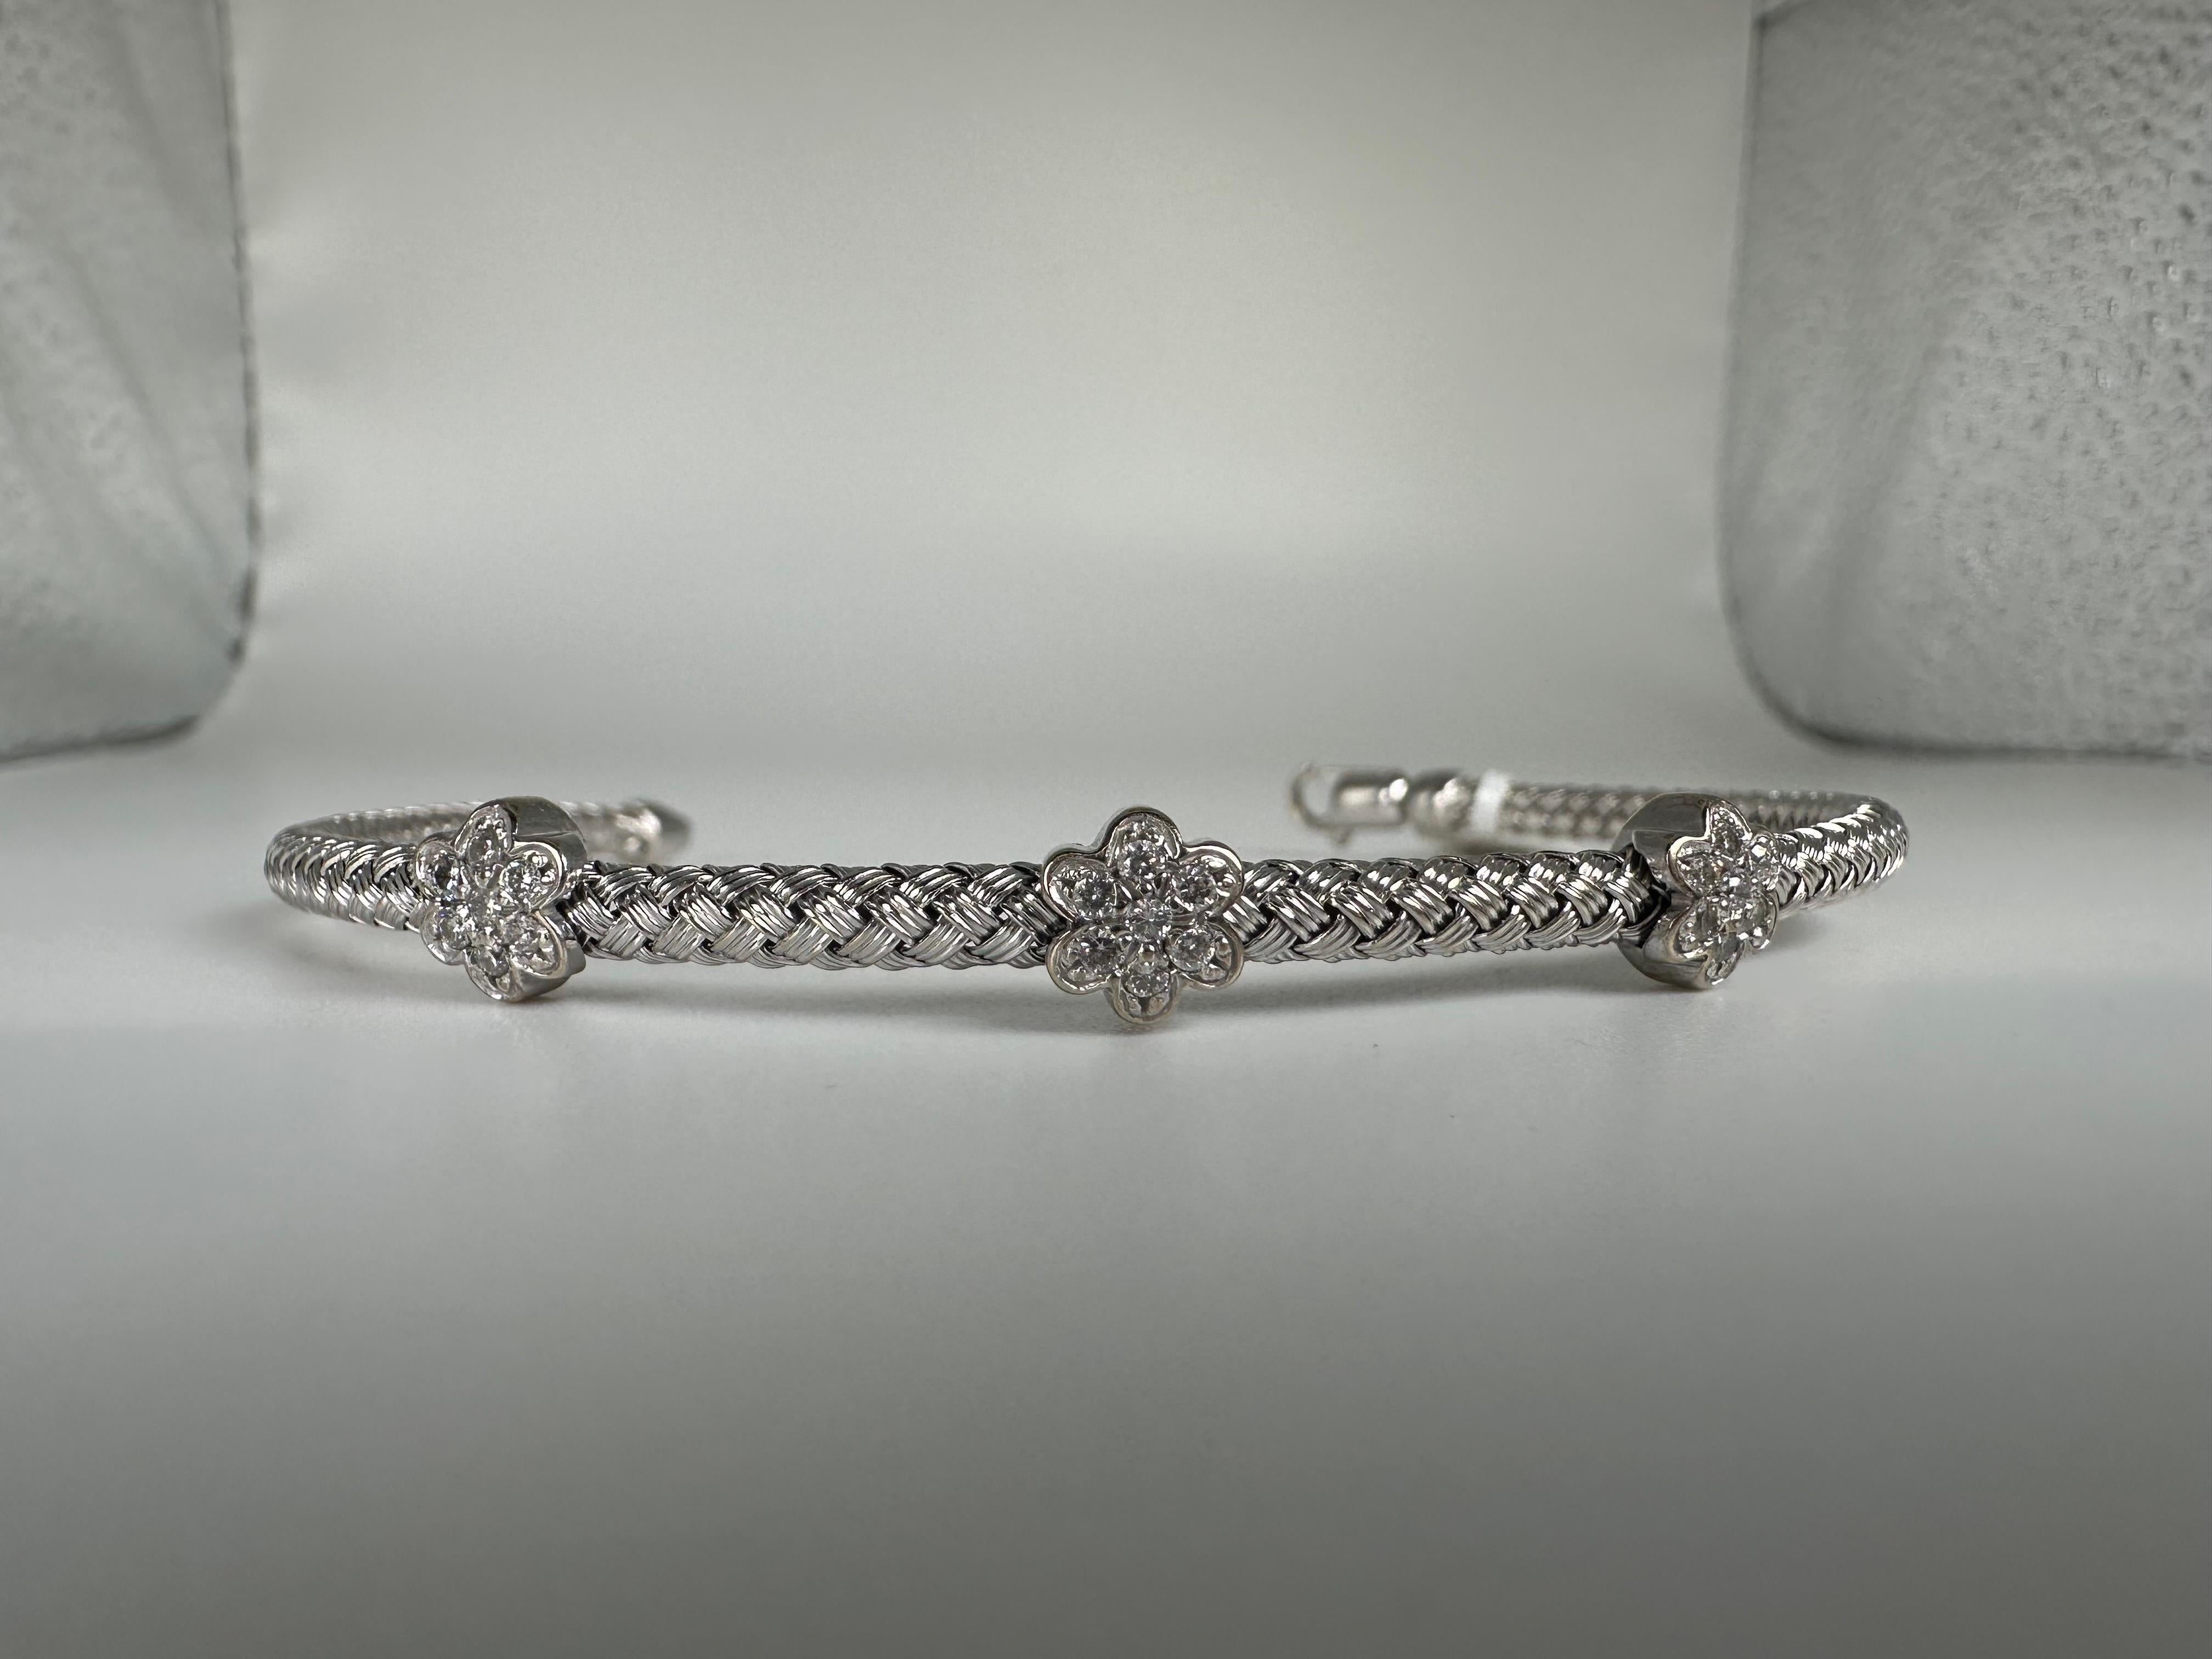 Beautiful workmanship, this bracelet is stuinning with sparkling diamonds, made in 14KT white gold with fleixible design and very comfortable approach!

METAL: 14KT white gold
NATURAL DIAMOND(S)
Clarity/Color: VS-SI/G
Carat:0.21ct
Cut:Round